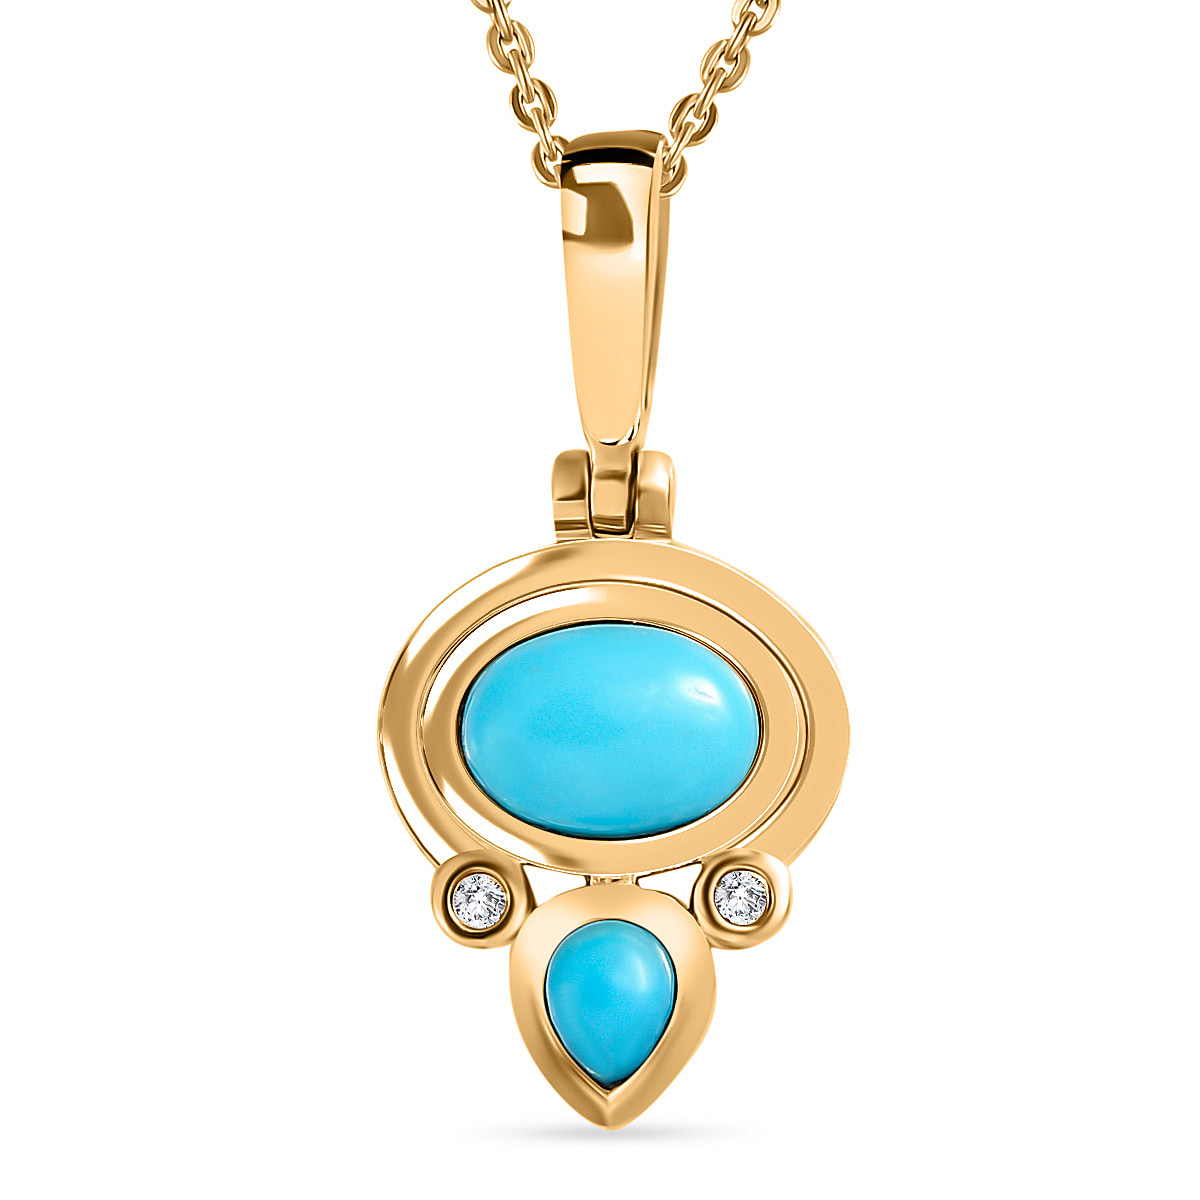 Arizona Sleeping Beauty Turquoise & Natural Zircon Pendant with Chain (Size 20) in 18K Vermeil YG Plated Sterling Silver, Silver Wt. 5.12 Gms